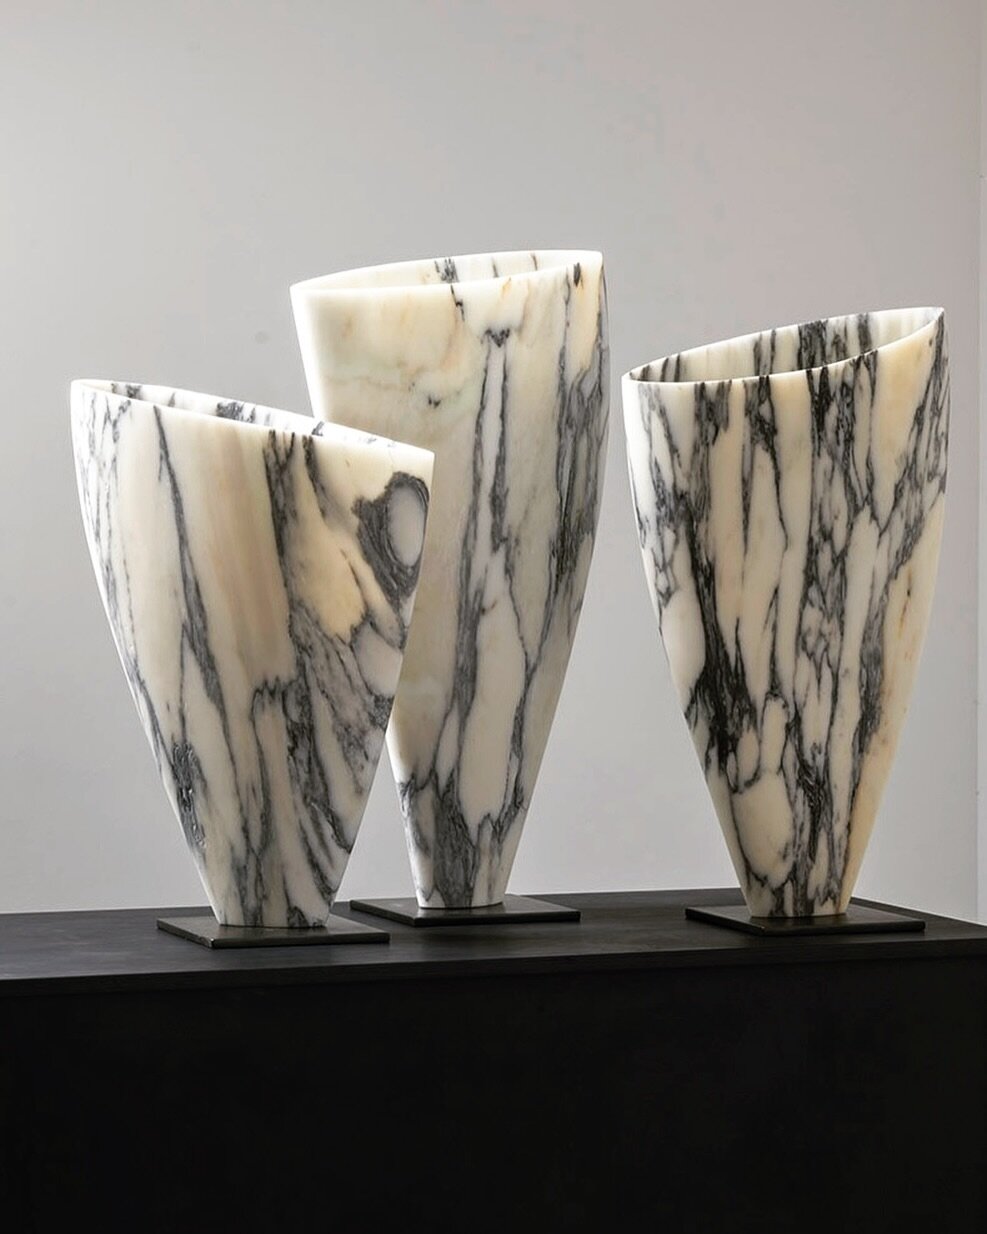 A trio of Ceres vessels in Paonazzo marble which  will be shown  @collectartfair with @qestcraft Somerset House, London  1-3
Mar (previews 28 &amp; 29 Feb). 
All carved from one block of this rare marble, from an old seam in Carrara that has particul